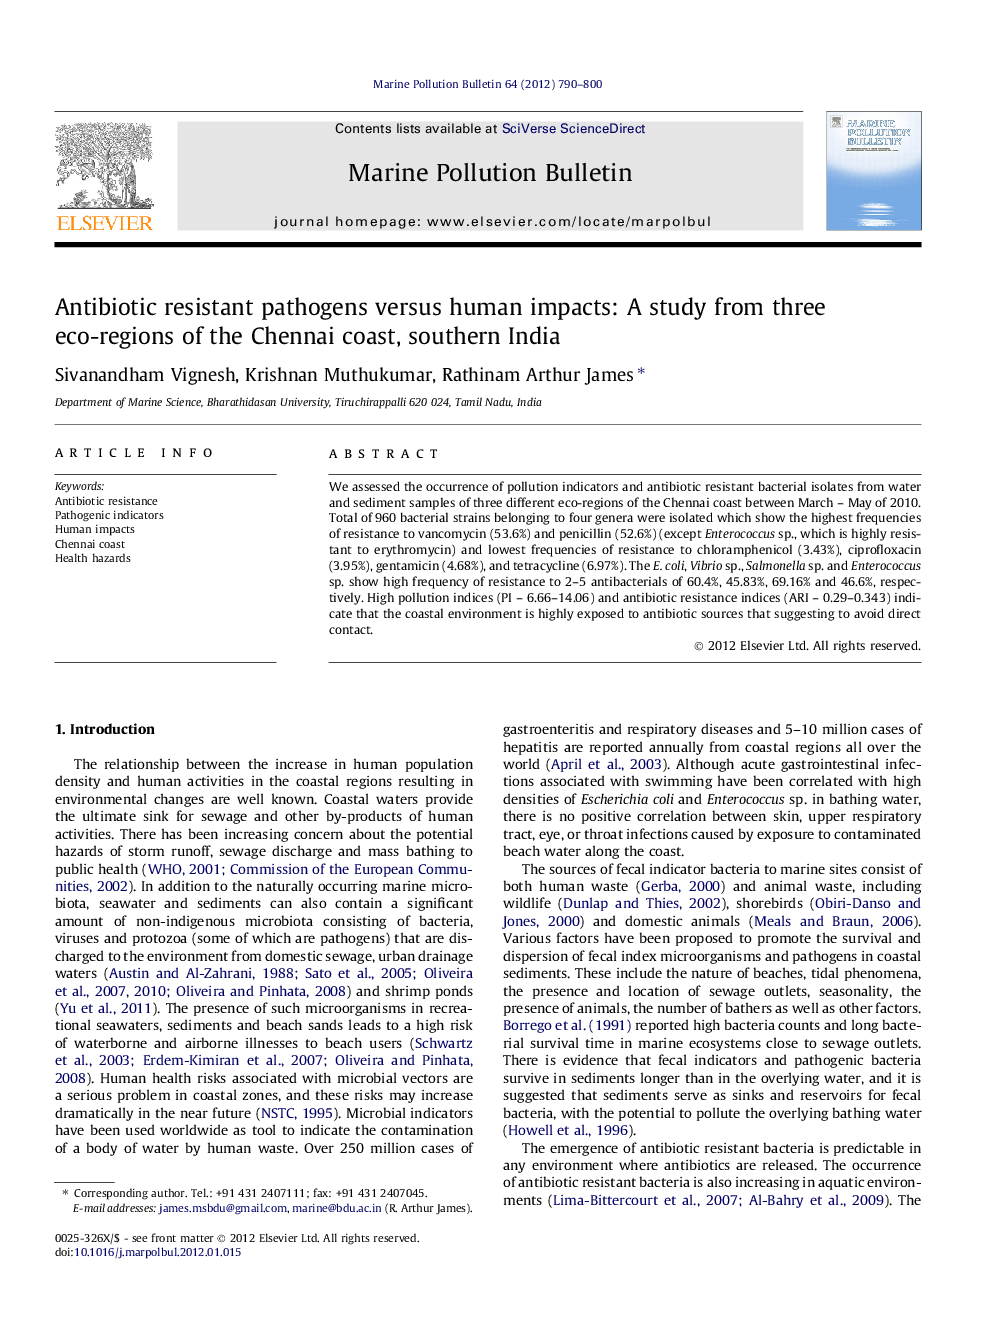 Antibiotic resistant pathogens versus human impacts: A study from three eco-regions of the Chennai coast, southern India